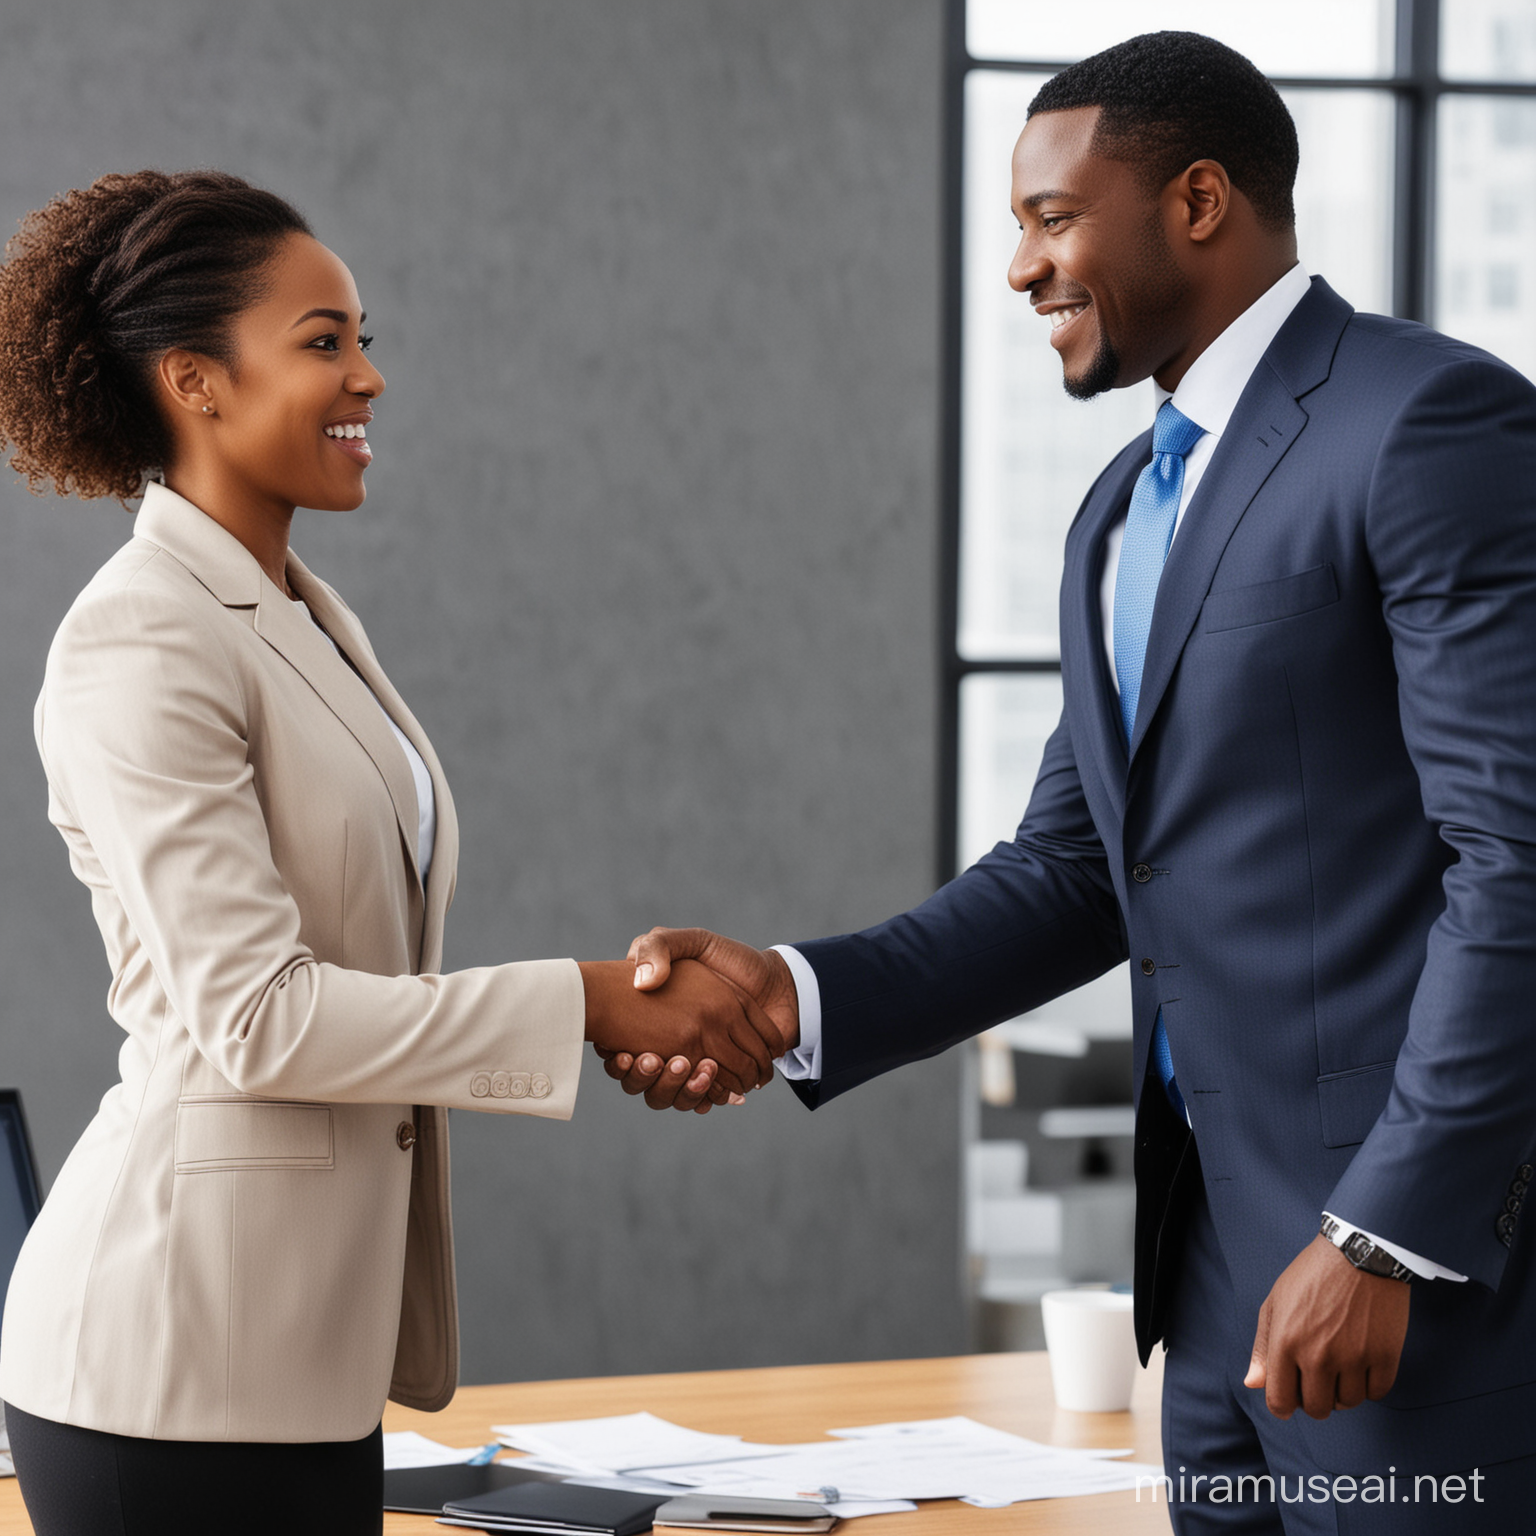 Black American Corporate Executives Shaking Hands in Office Setting